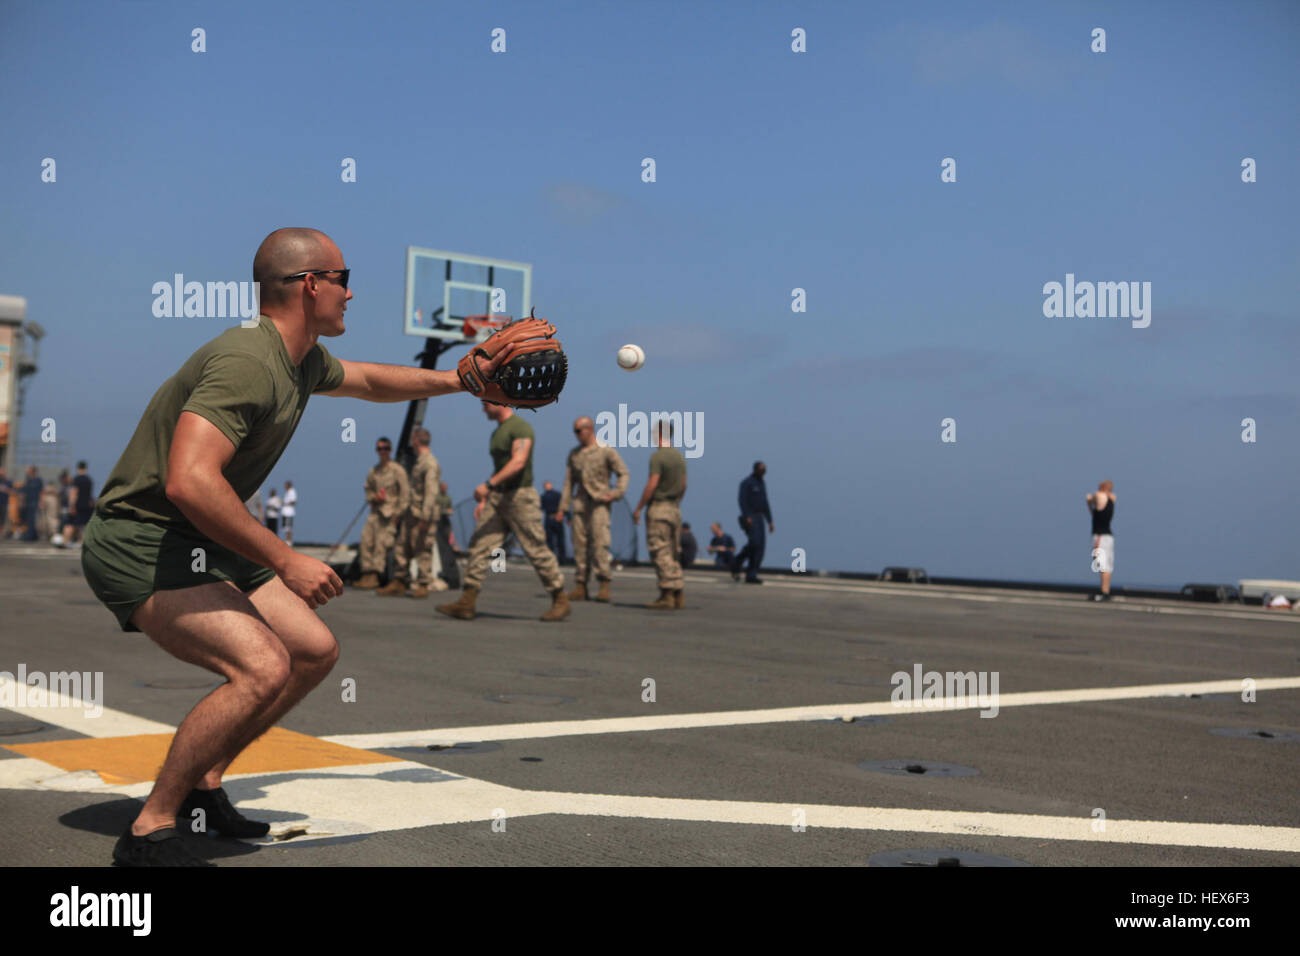 Sergeant Michael Castro, an infantryman with  Headquarters Platoon, Company K, Battalion Landing Team 3/8, 26th Marine Expeditionary Unit, catches a baseball on the flight deck of USS Ponce during a steel beach picnic, Oct. 16, 2010. The picnic was held to boost moral, increase camaraderie and offered fishing, swimming and other sports activities. 26th MEU is currently embarked aboard the ships of Kearsarge Amphibious Ready Group operating in the 5th Fleet area of responsibility. (Official USMC Photo by Staff Sgt. Danielle M. Bacon/ Released) USS Ponce Steel Beach DVIDS333281 Stock Photo